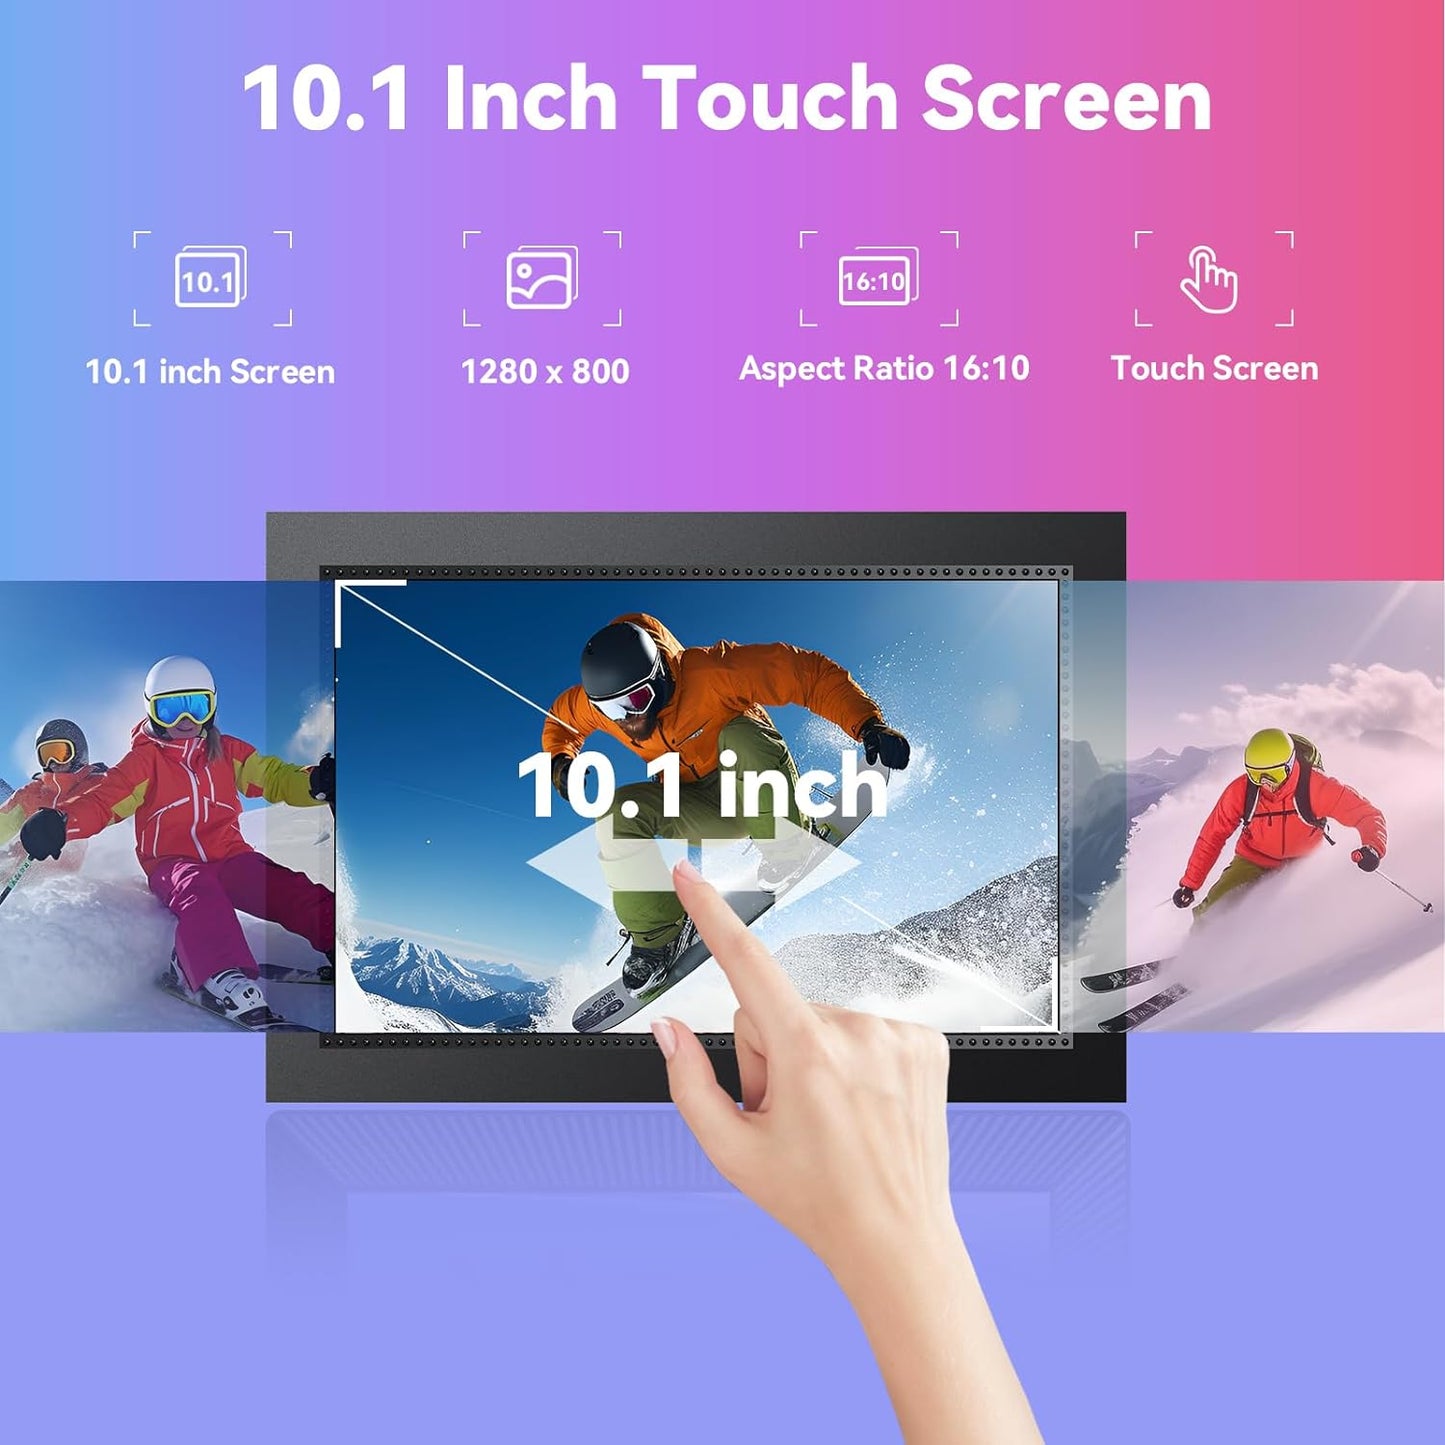 10.1 Inch Smart Digital HD Touch Screen Picture Frame WiFi, 16GB Storage 1280x800